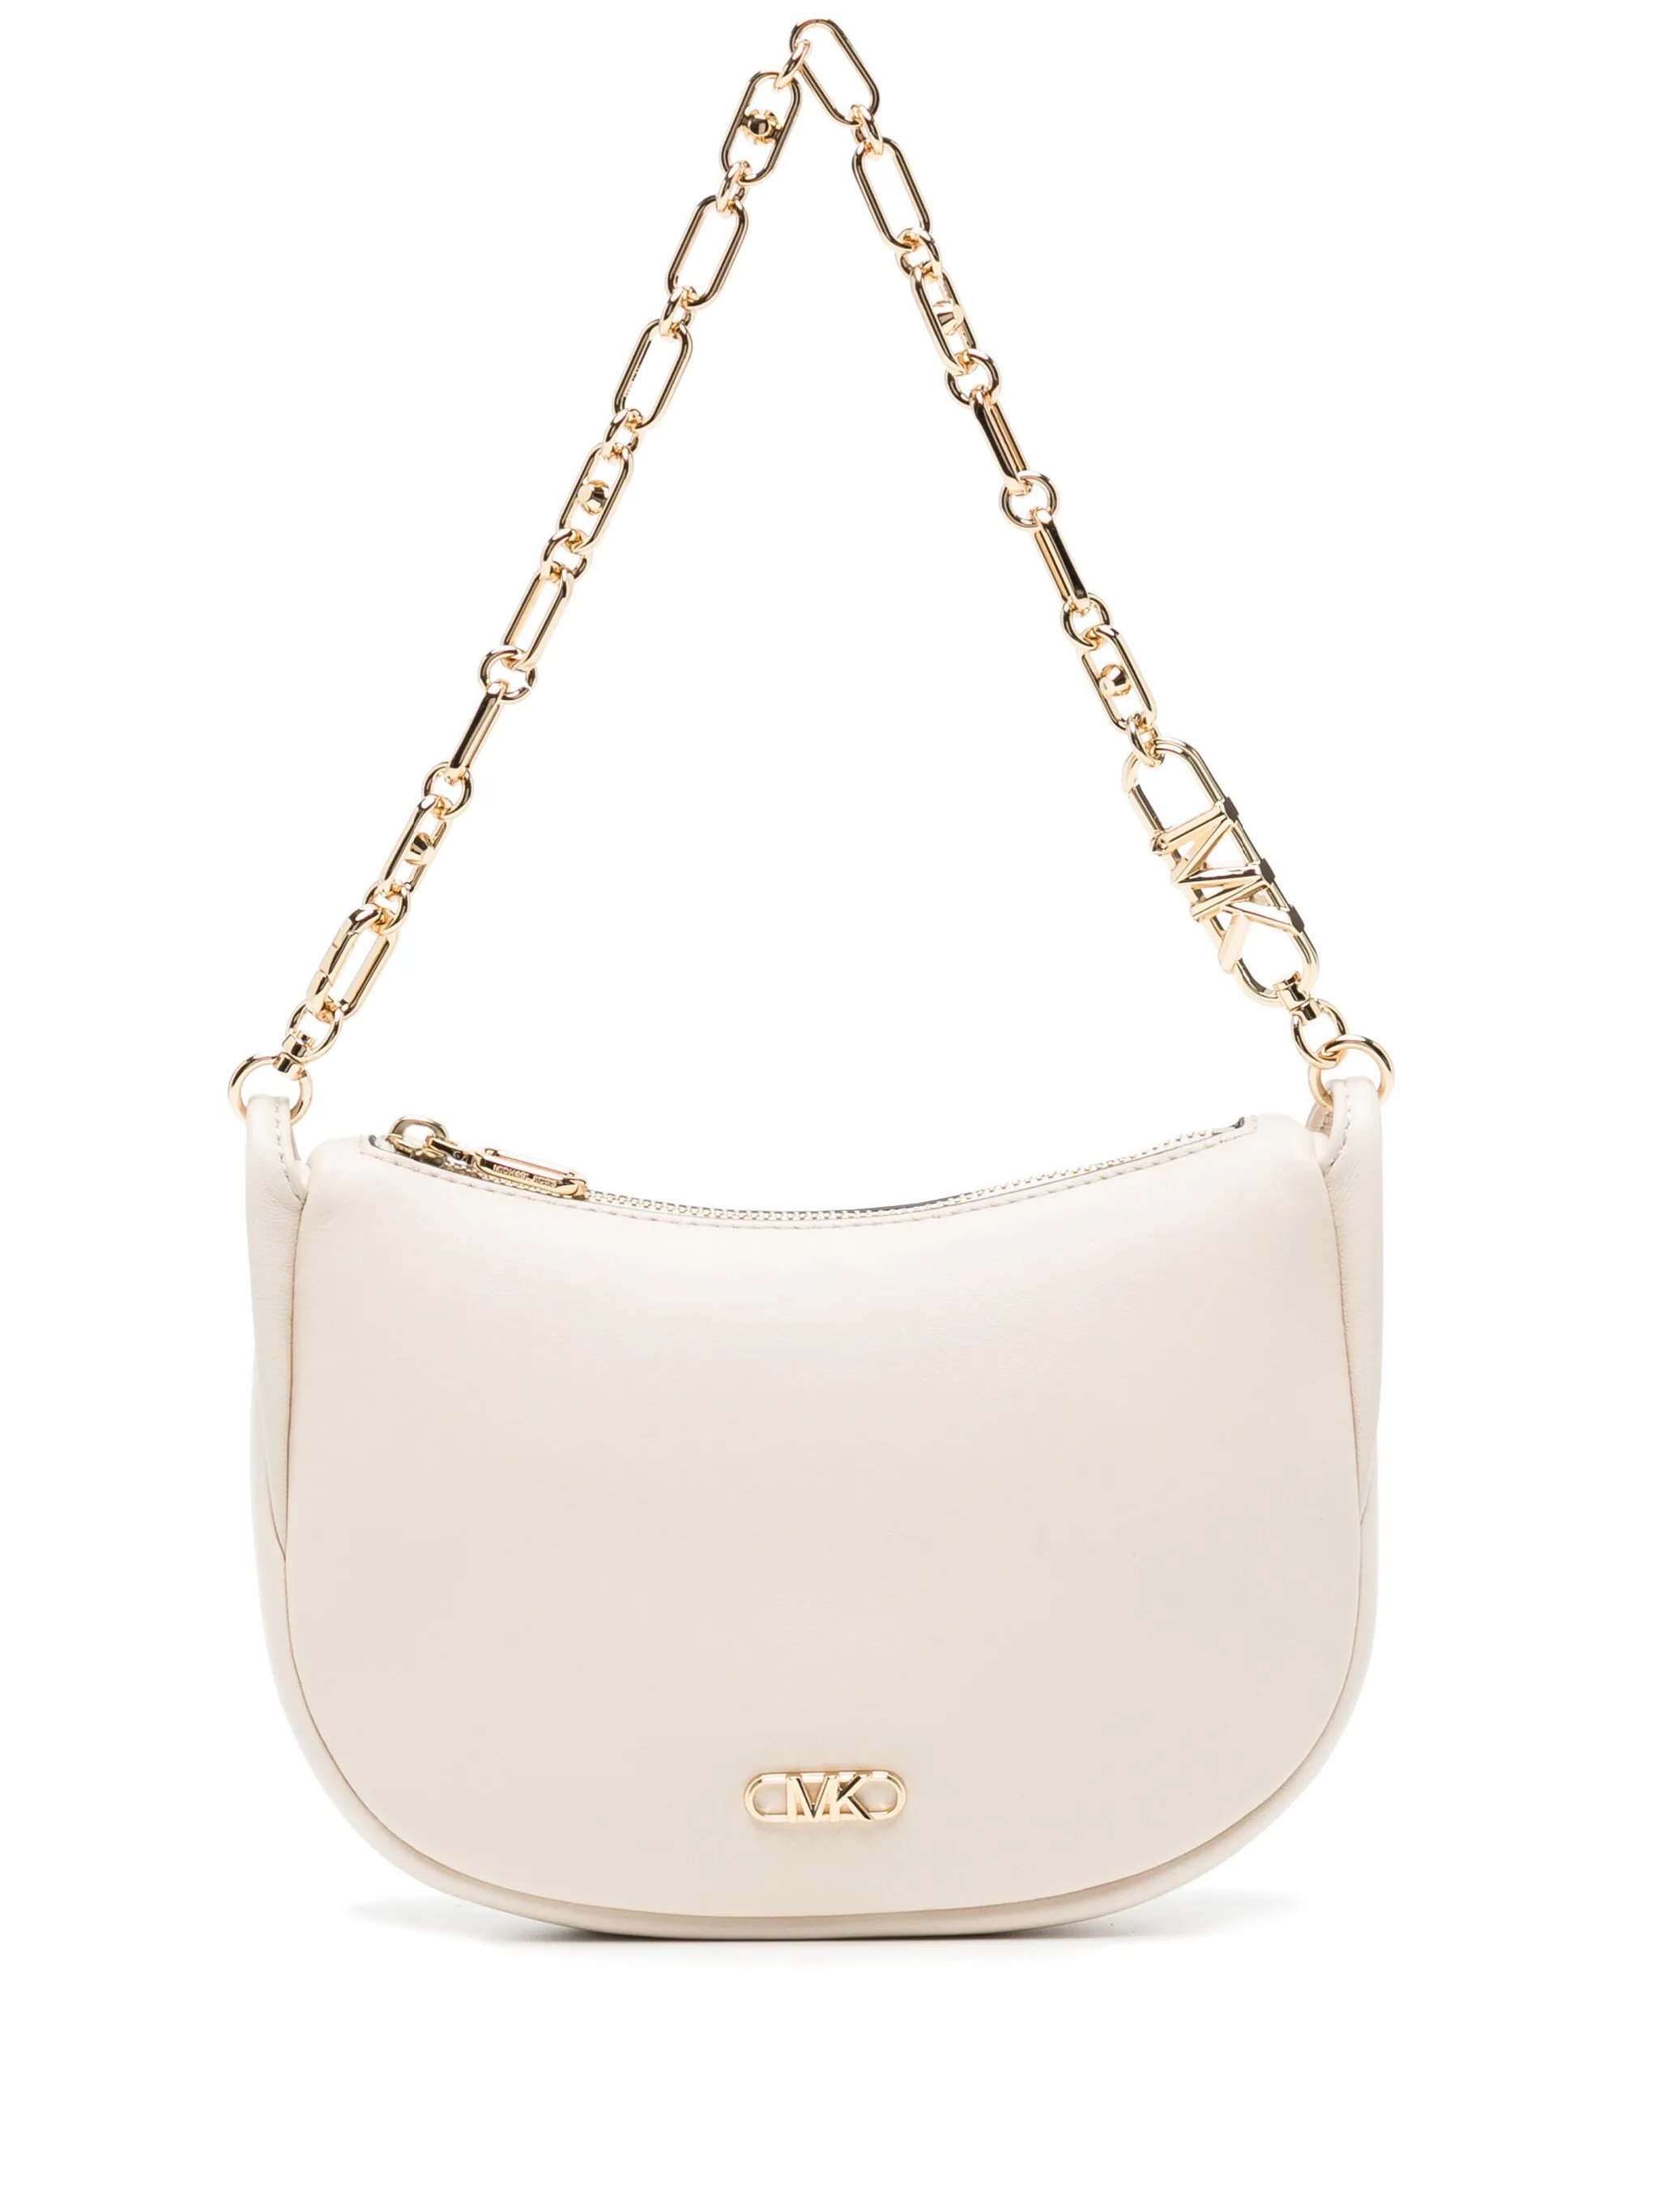 MICHAEL KORS KENDALL SMALL LEATHER SHOULDER/CLUTCH ΤΣΑΝΤΑ